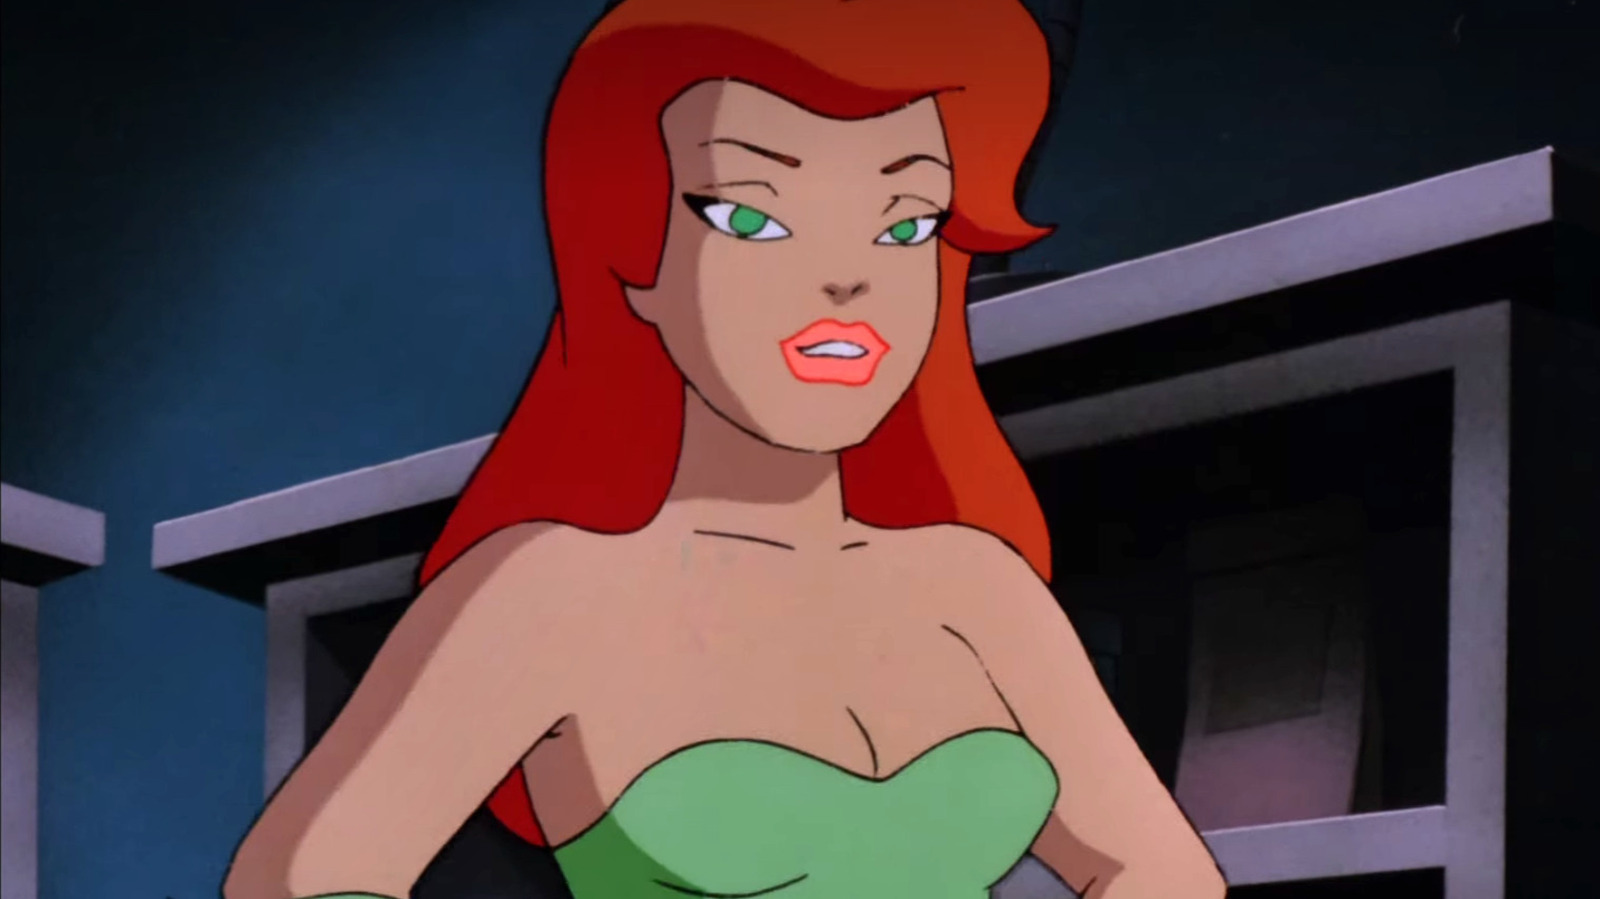 poison ivy from batman pics